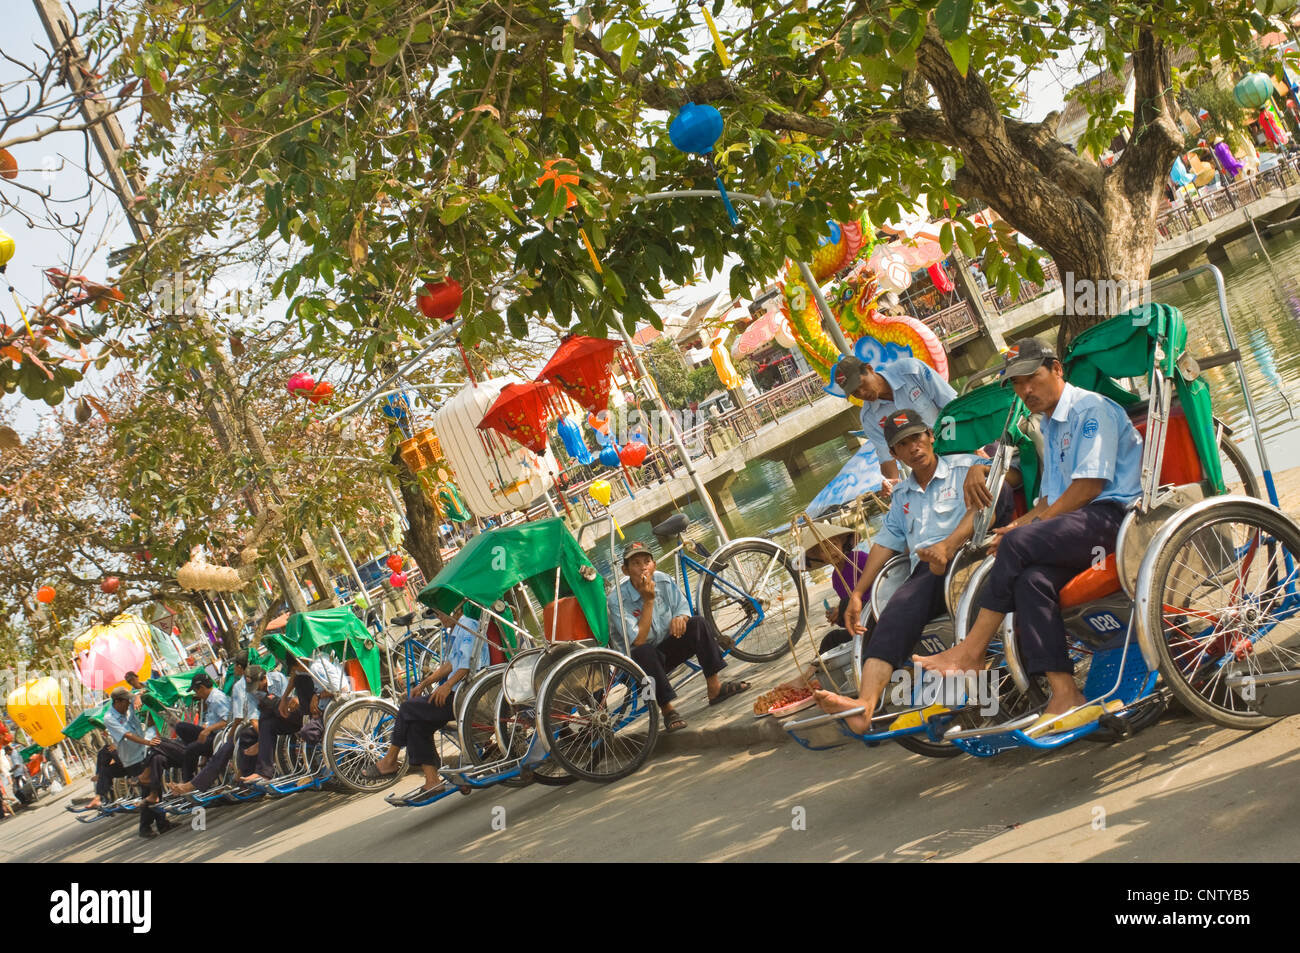 Horizontal view of cycle-rickshaws or cyclos and drivers waiting for customers in the ancient town of Hoi An, Vietnam on a sunny day. Stock Photo